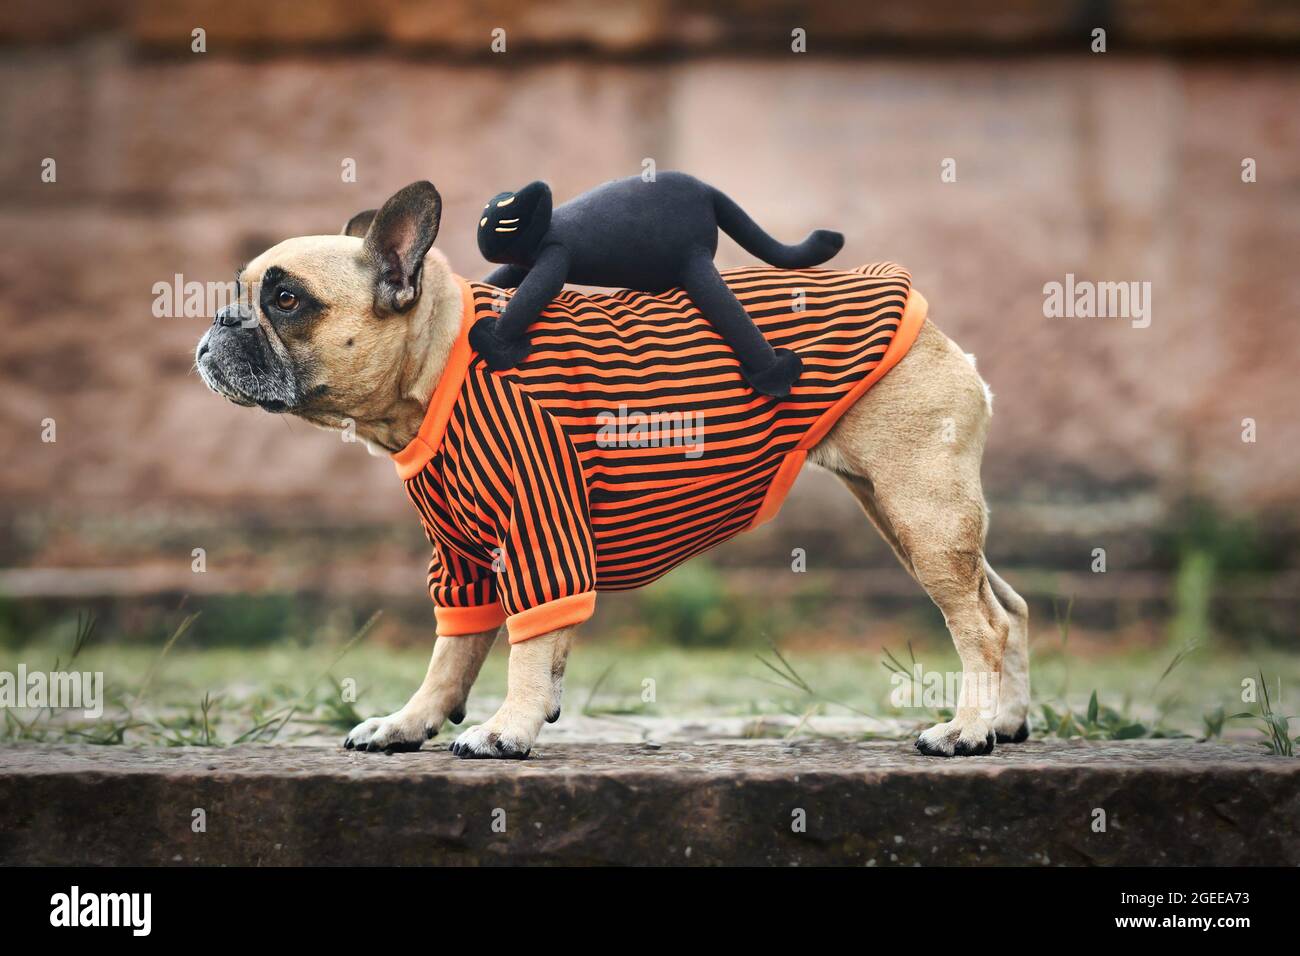 Spooktacular Safety Tips for Celebrating Halloween with Your Pup-kin –  Frenchie Bulldog